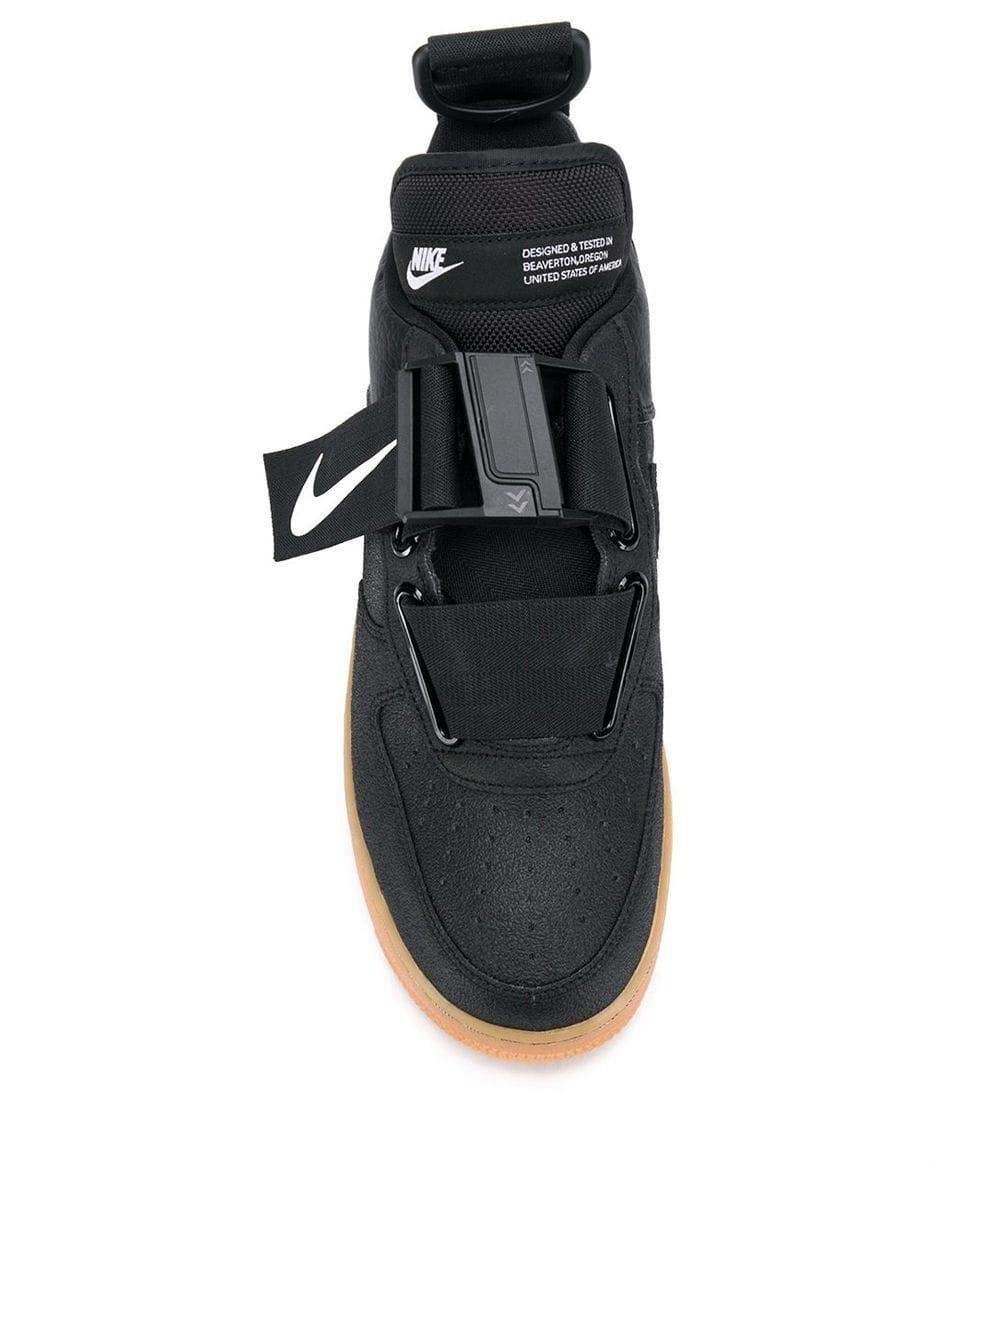 Nike Leather Air Adjustable Strap Sneakers in Black for Men - Lyst